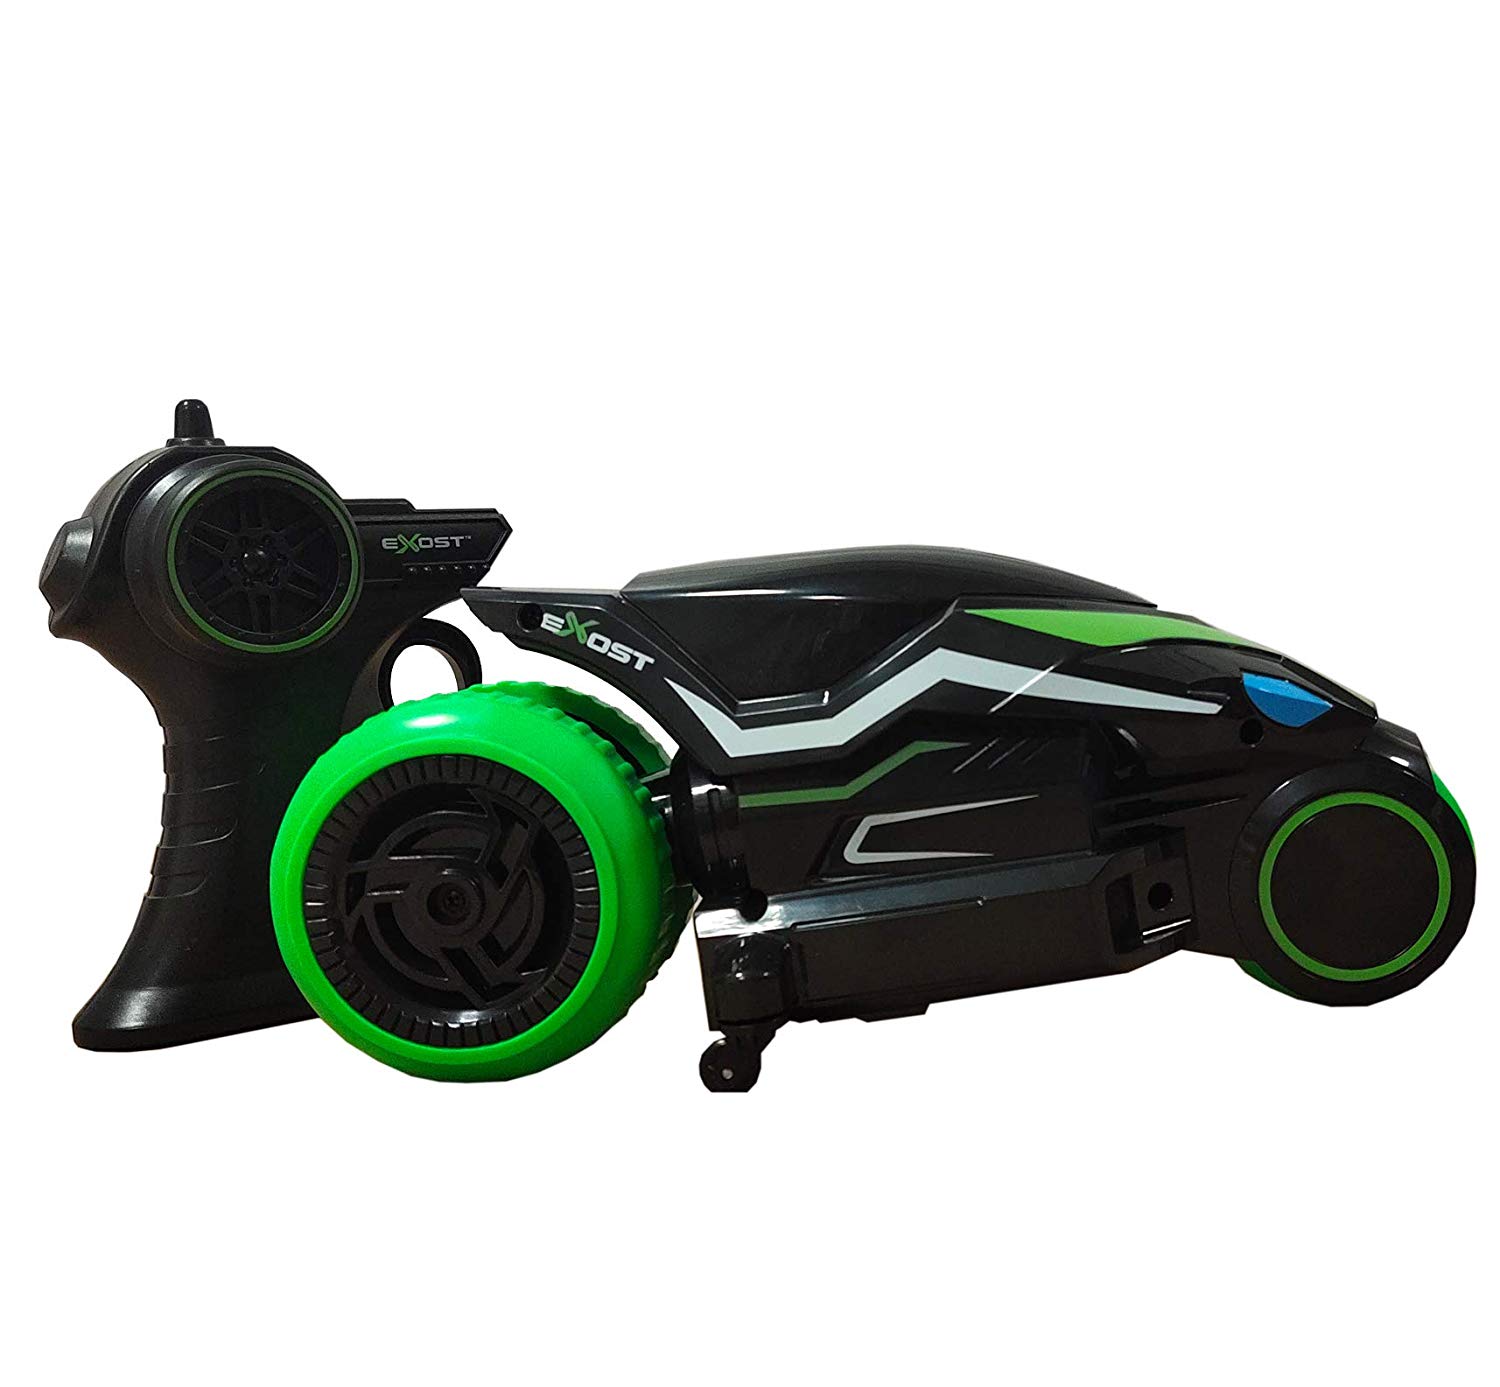 Motodrift Exost remote-controlled motorcycle Silverlit